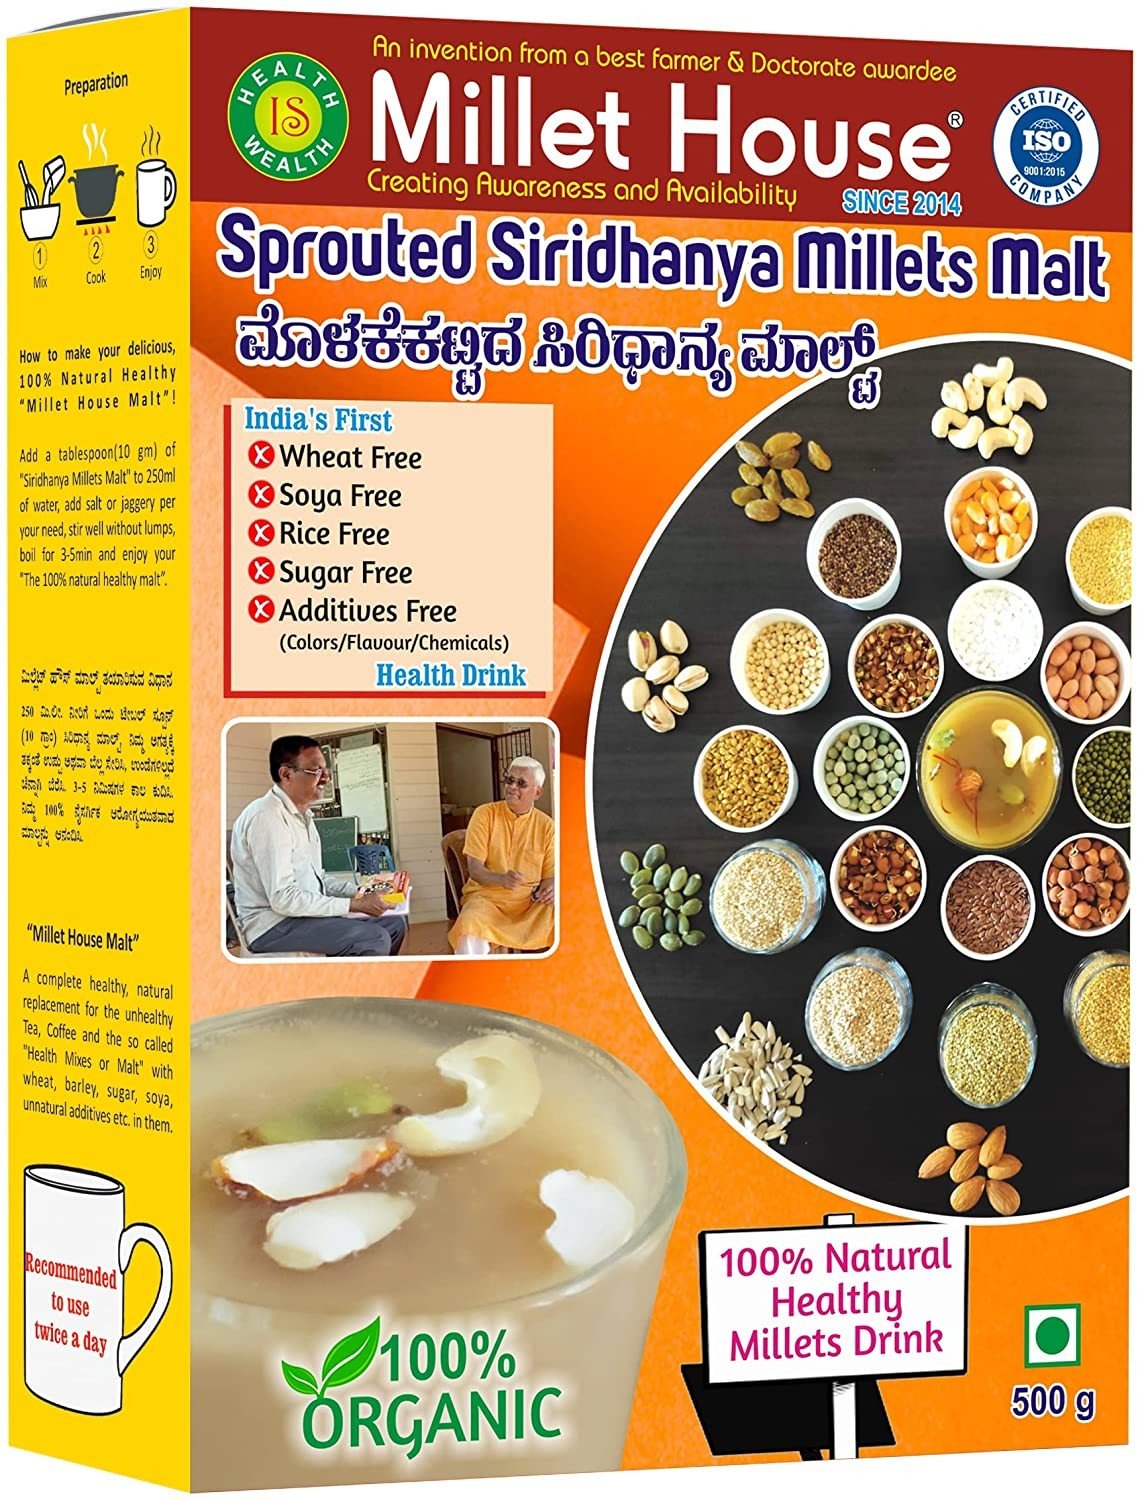 Millet House Malt-100% Healthy Natural Millets Drink- Wheat Free, SOYA Free, White Rice Free, Barley Free, No Added Sugar ~30 Natural Ingredients Sprouted Siridhanya Millet 500G